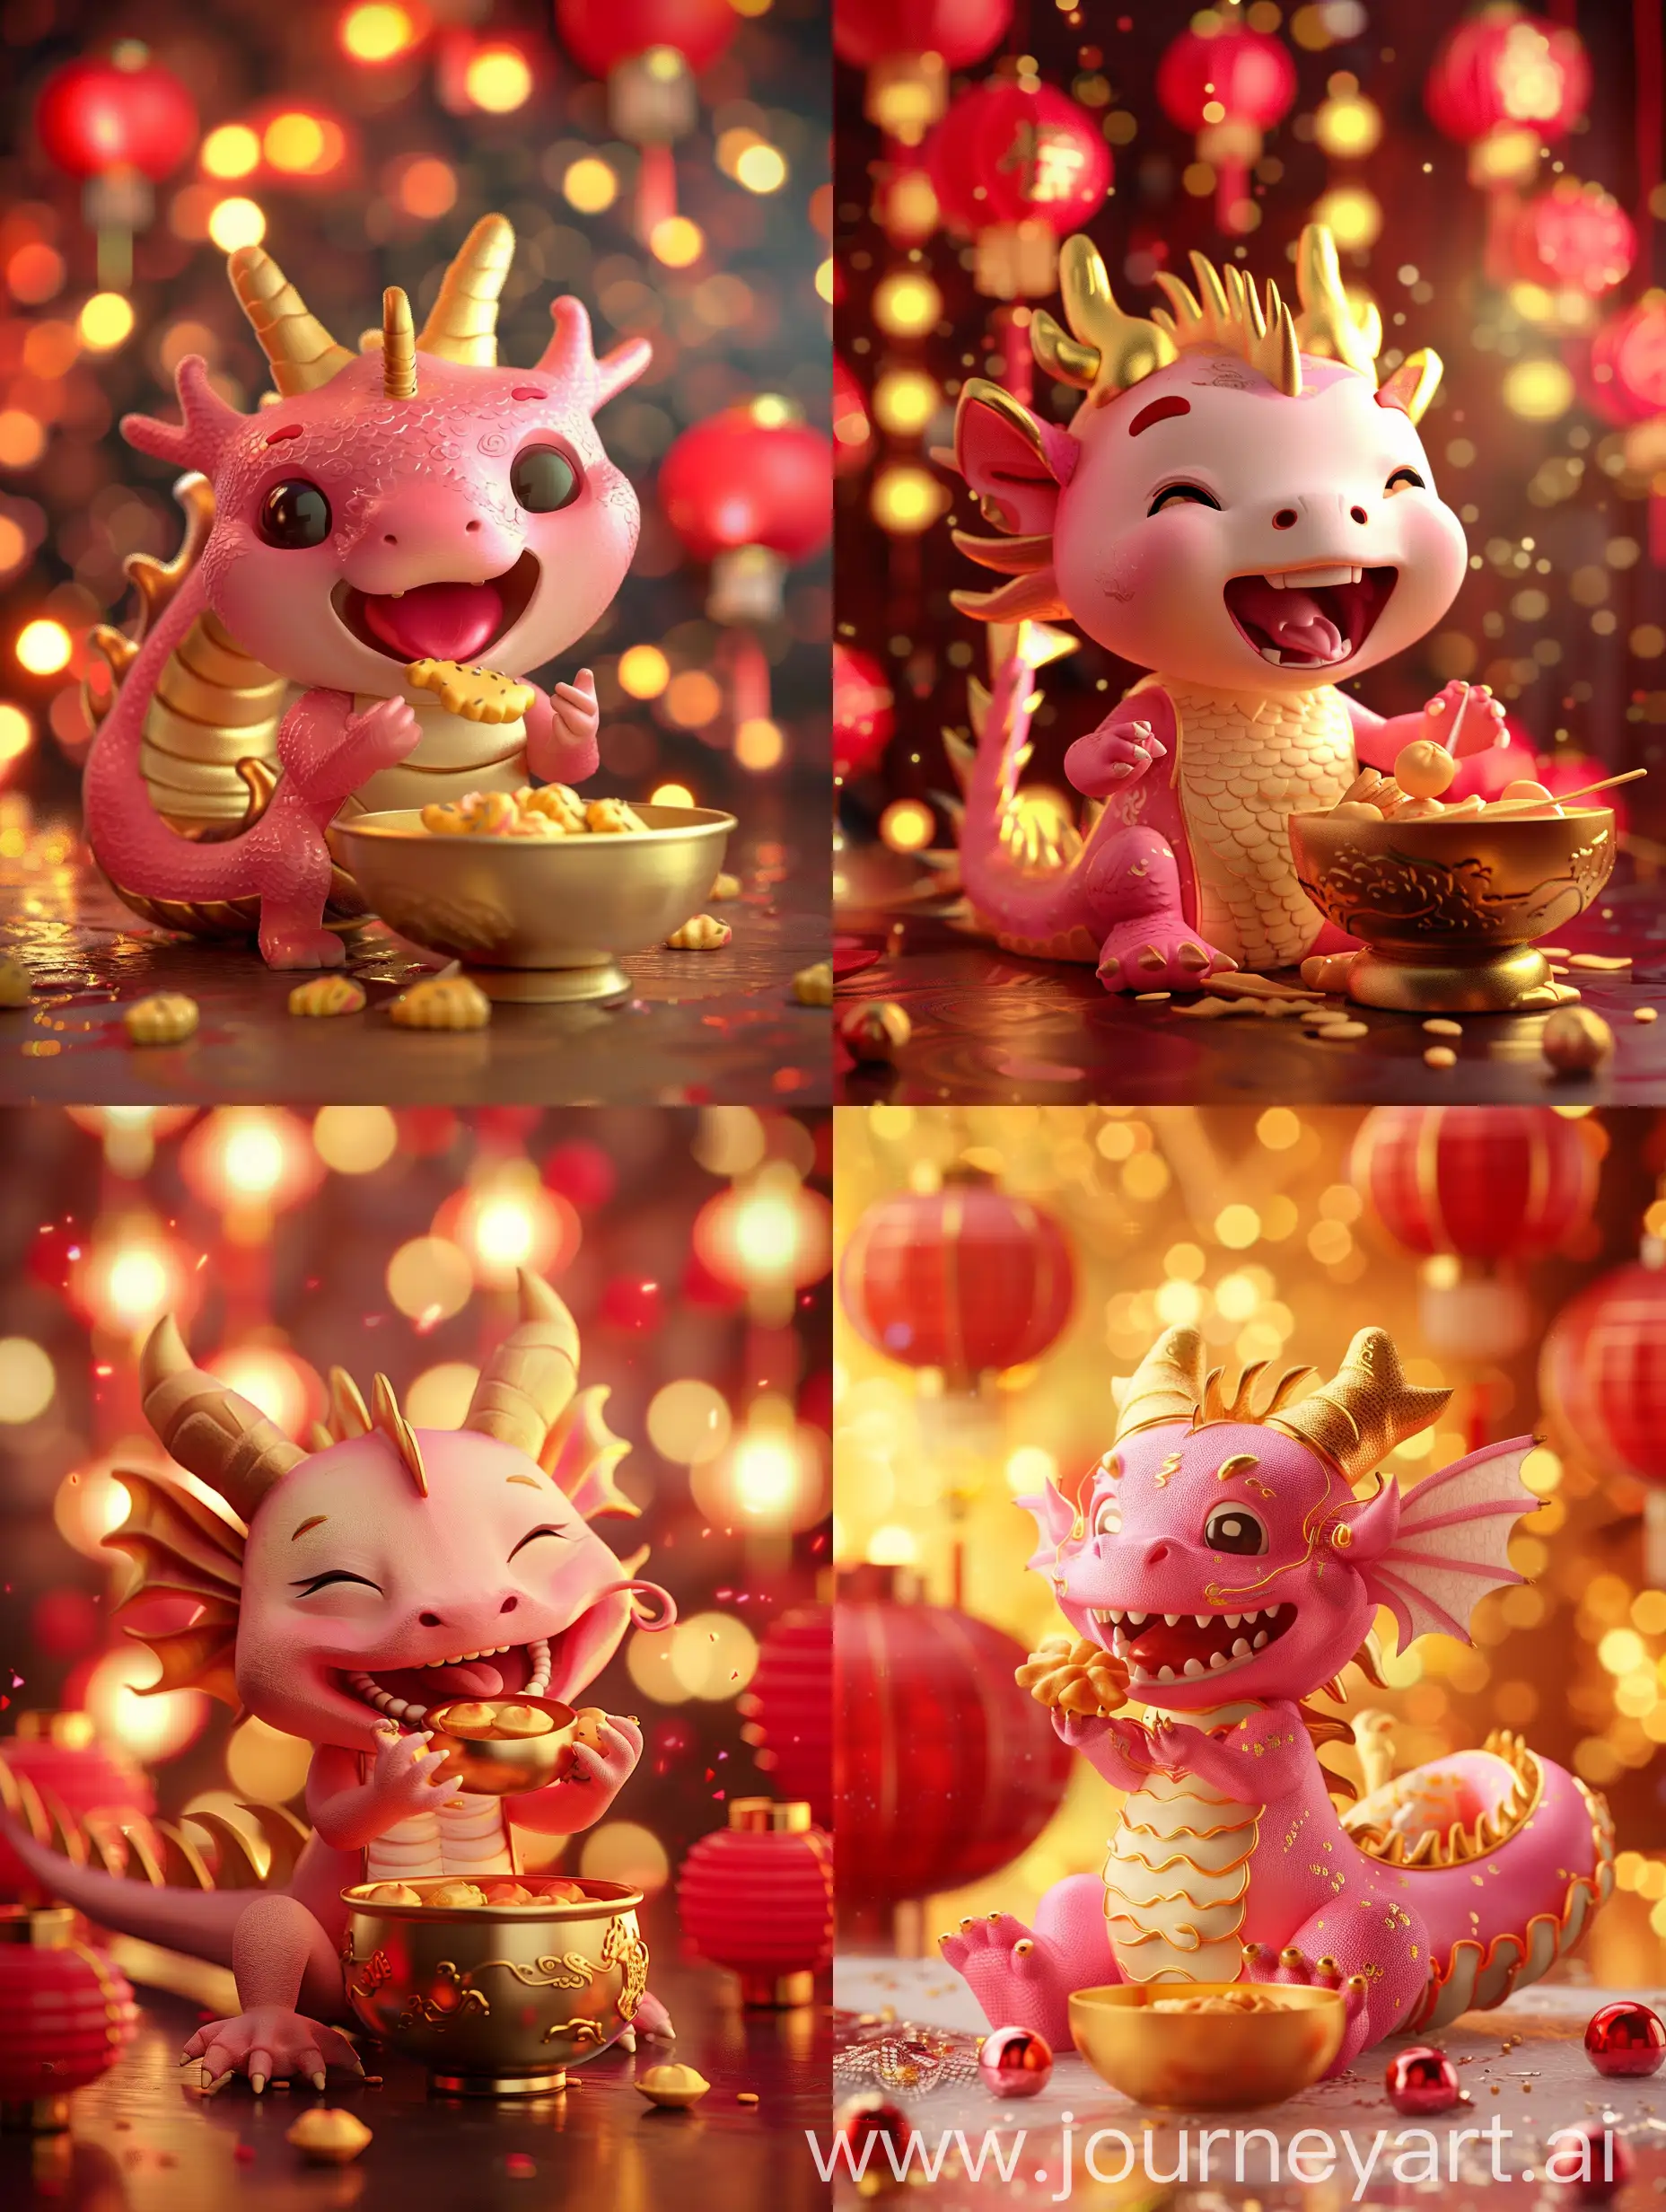 Cute 3D Pink (90%) and Gold (10%) kid Chinese dragon with benign smile eating Tang Yuan from a golden bowl. Red Chinese lanterns in the background bokeh